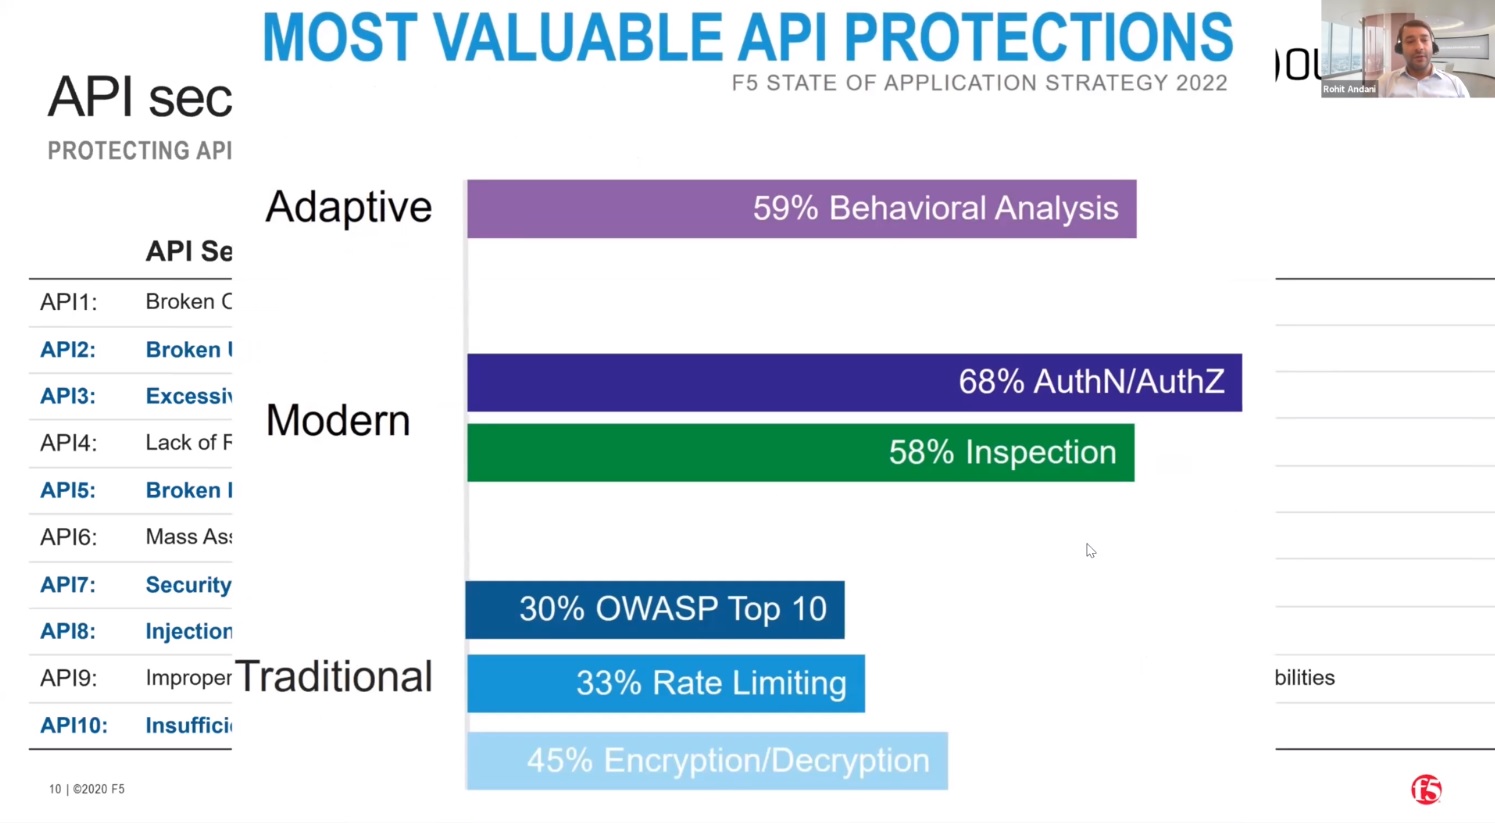 Most valuable API protections